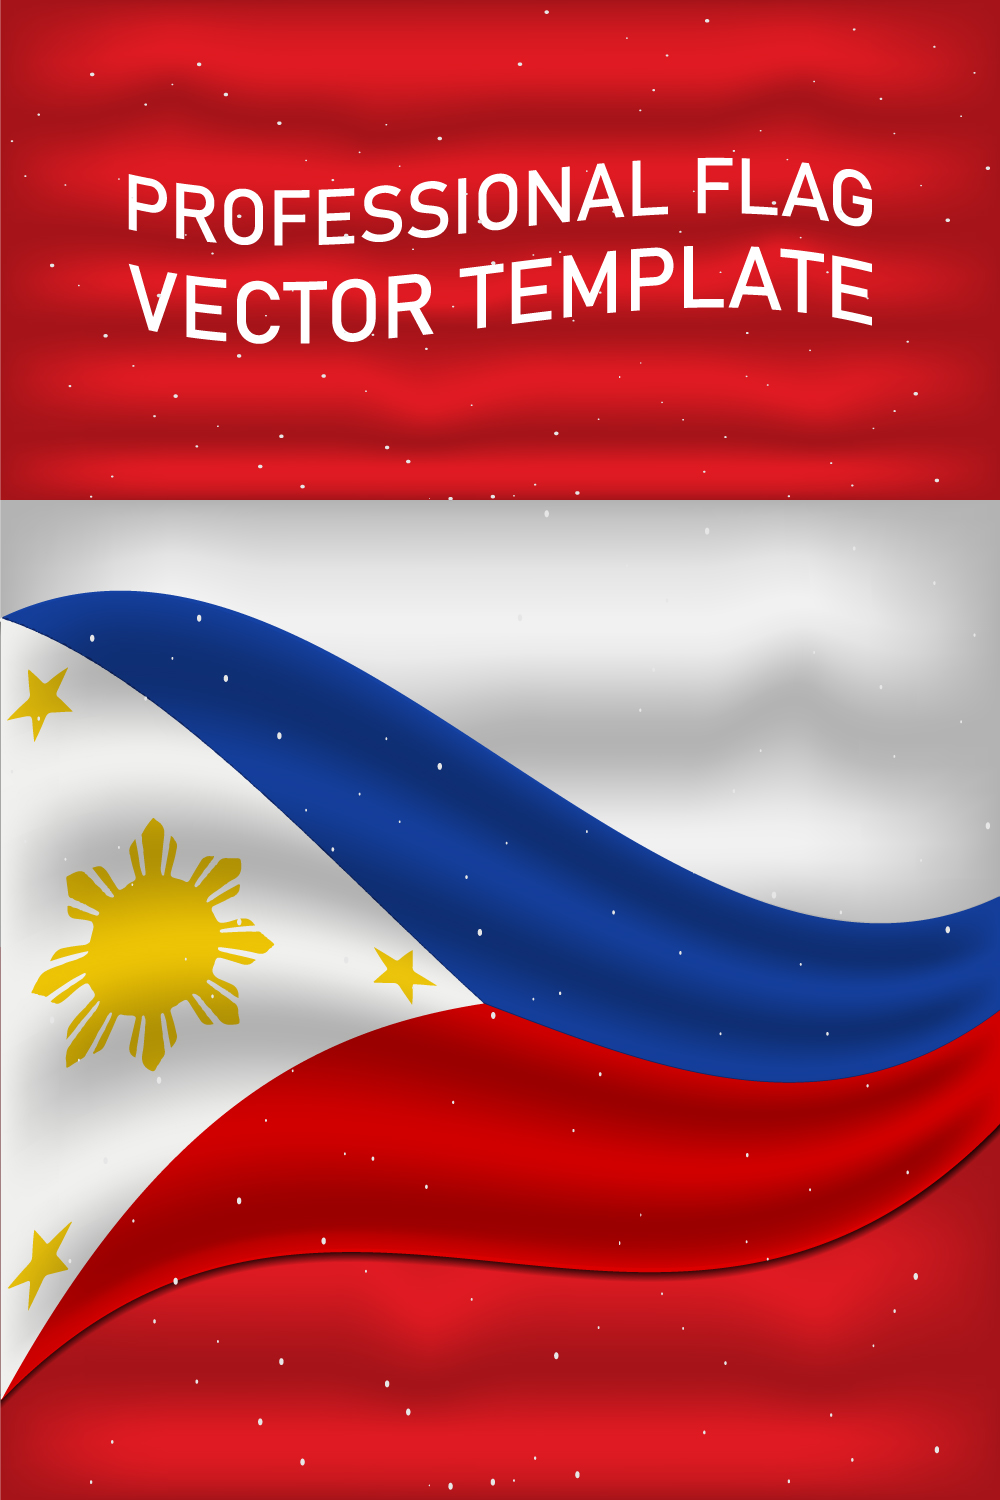 Enchanting image of the flag of the Philippines.